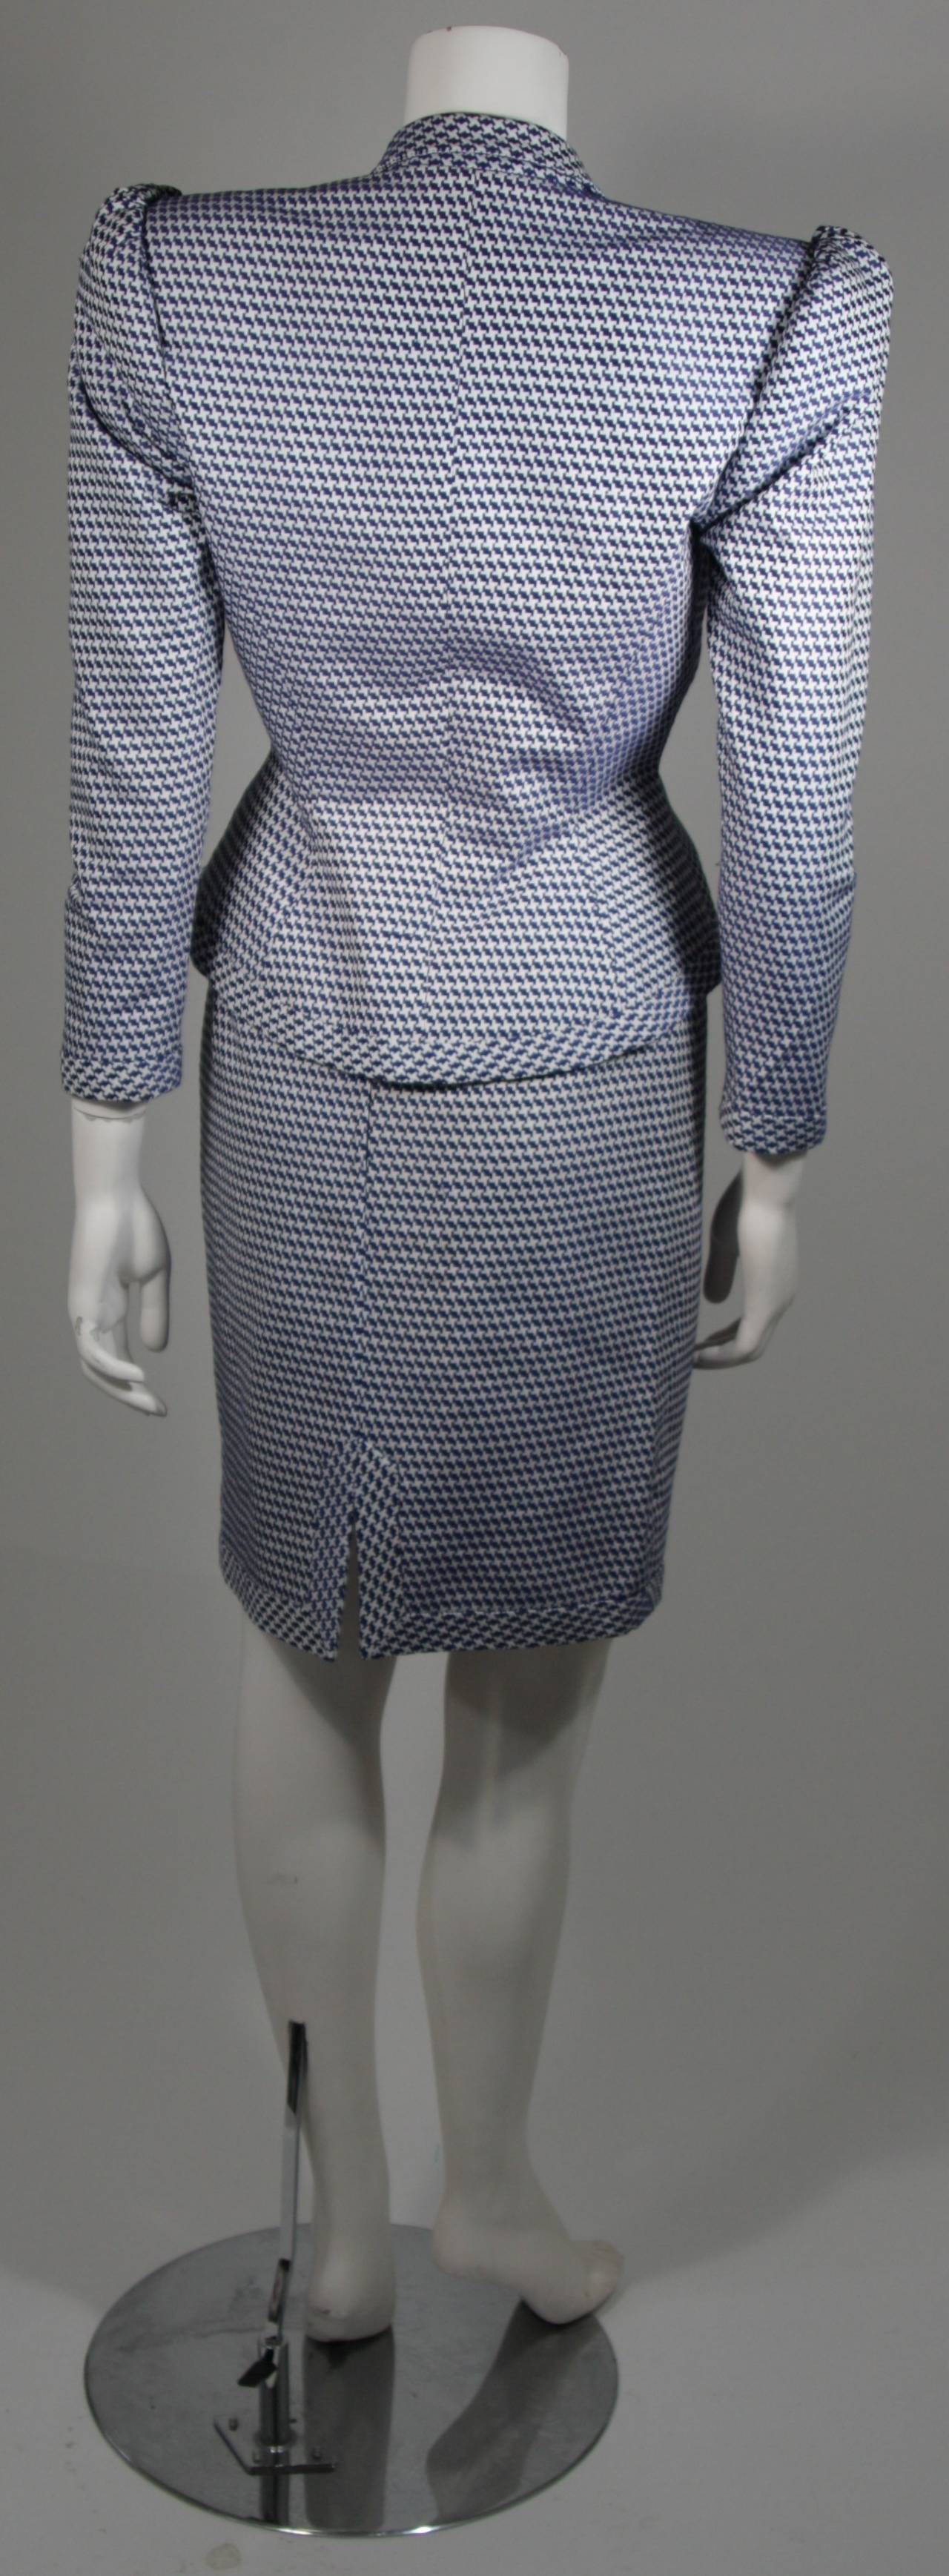 Leon Paule Sculptural Royal Blue & White Fitted Houndstooth Jacket & Skirt Suit 1